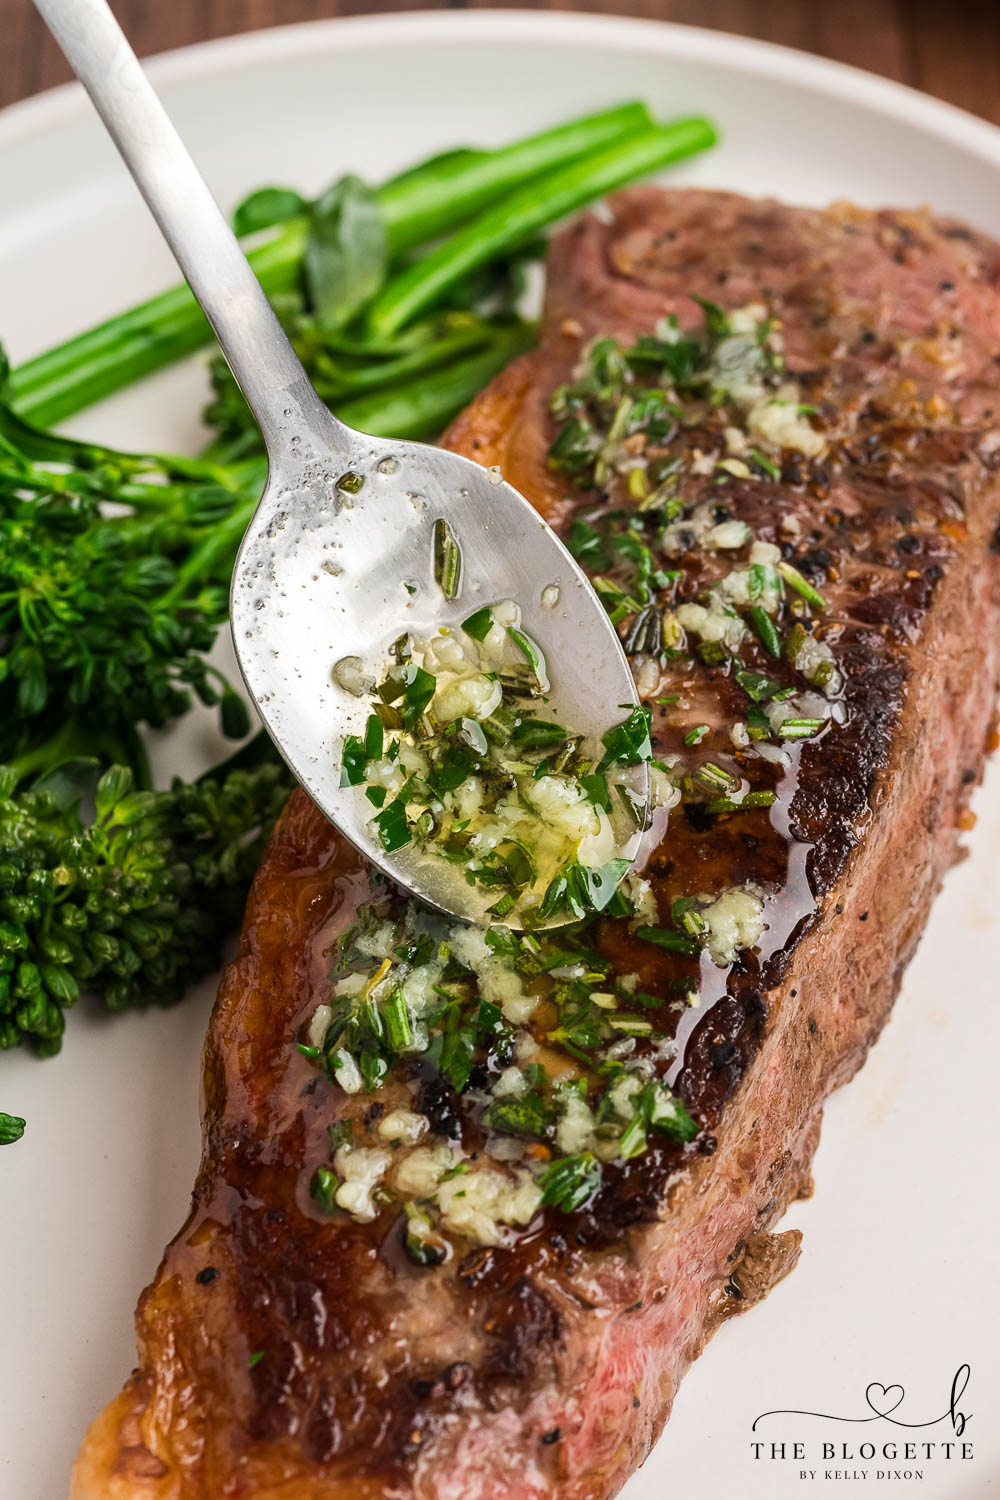 Steak with herb butter